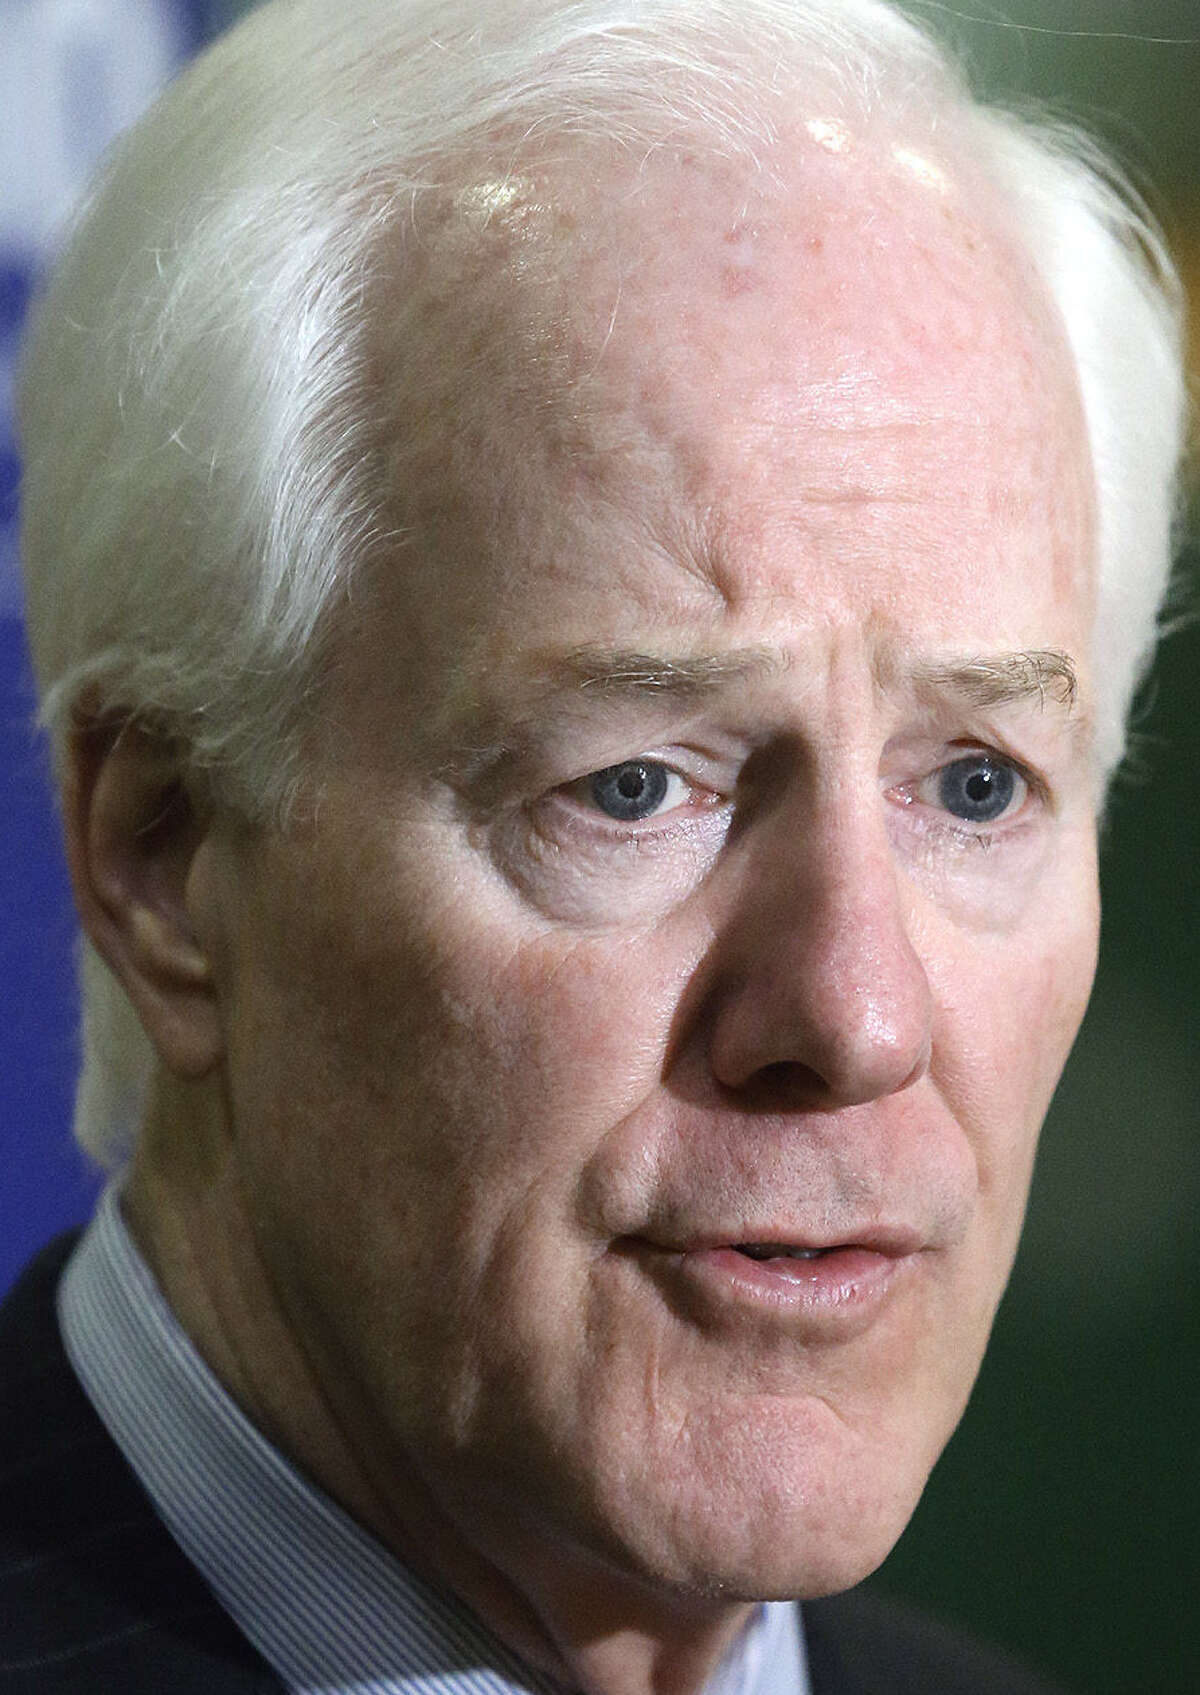 Sen. John Cornyn says Gillibrand's request for information “sounds awfully broad.”